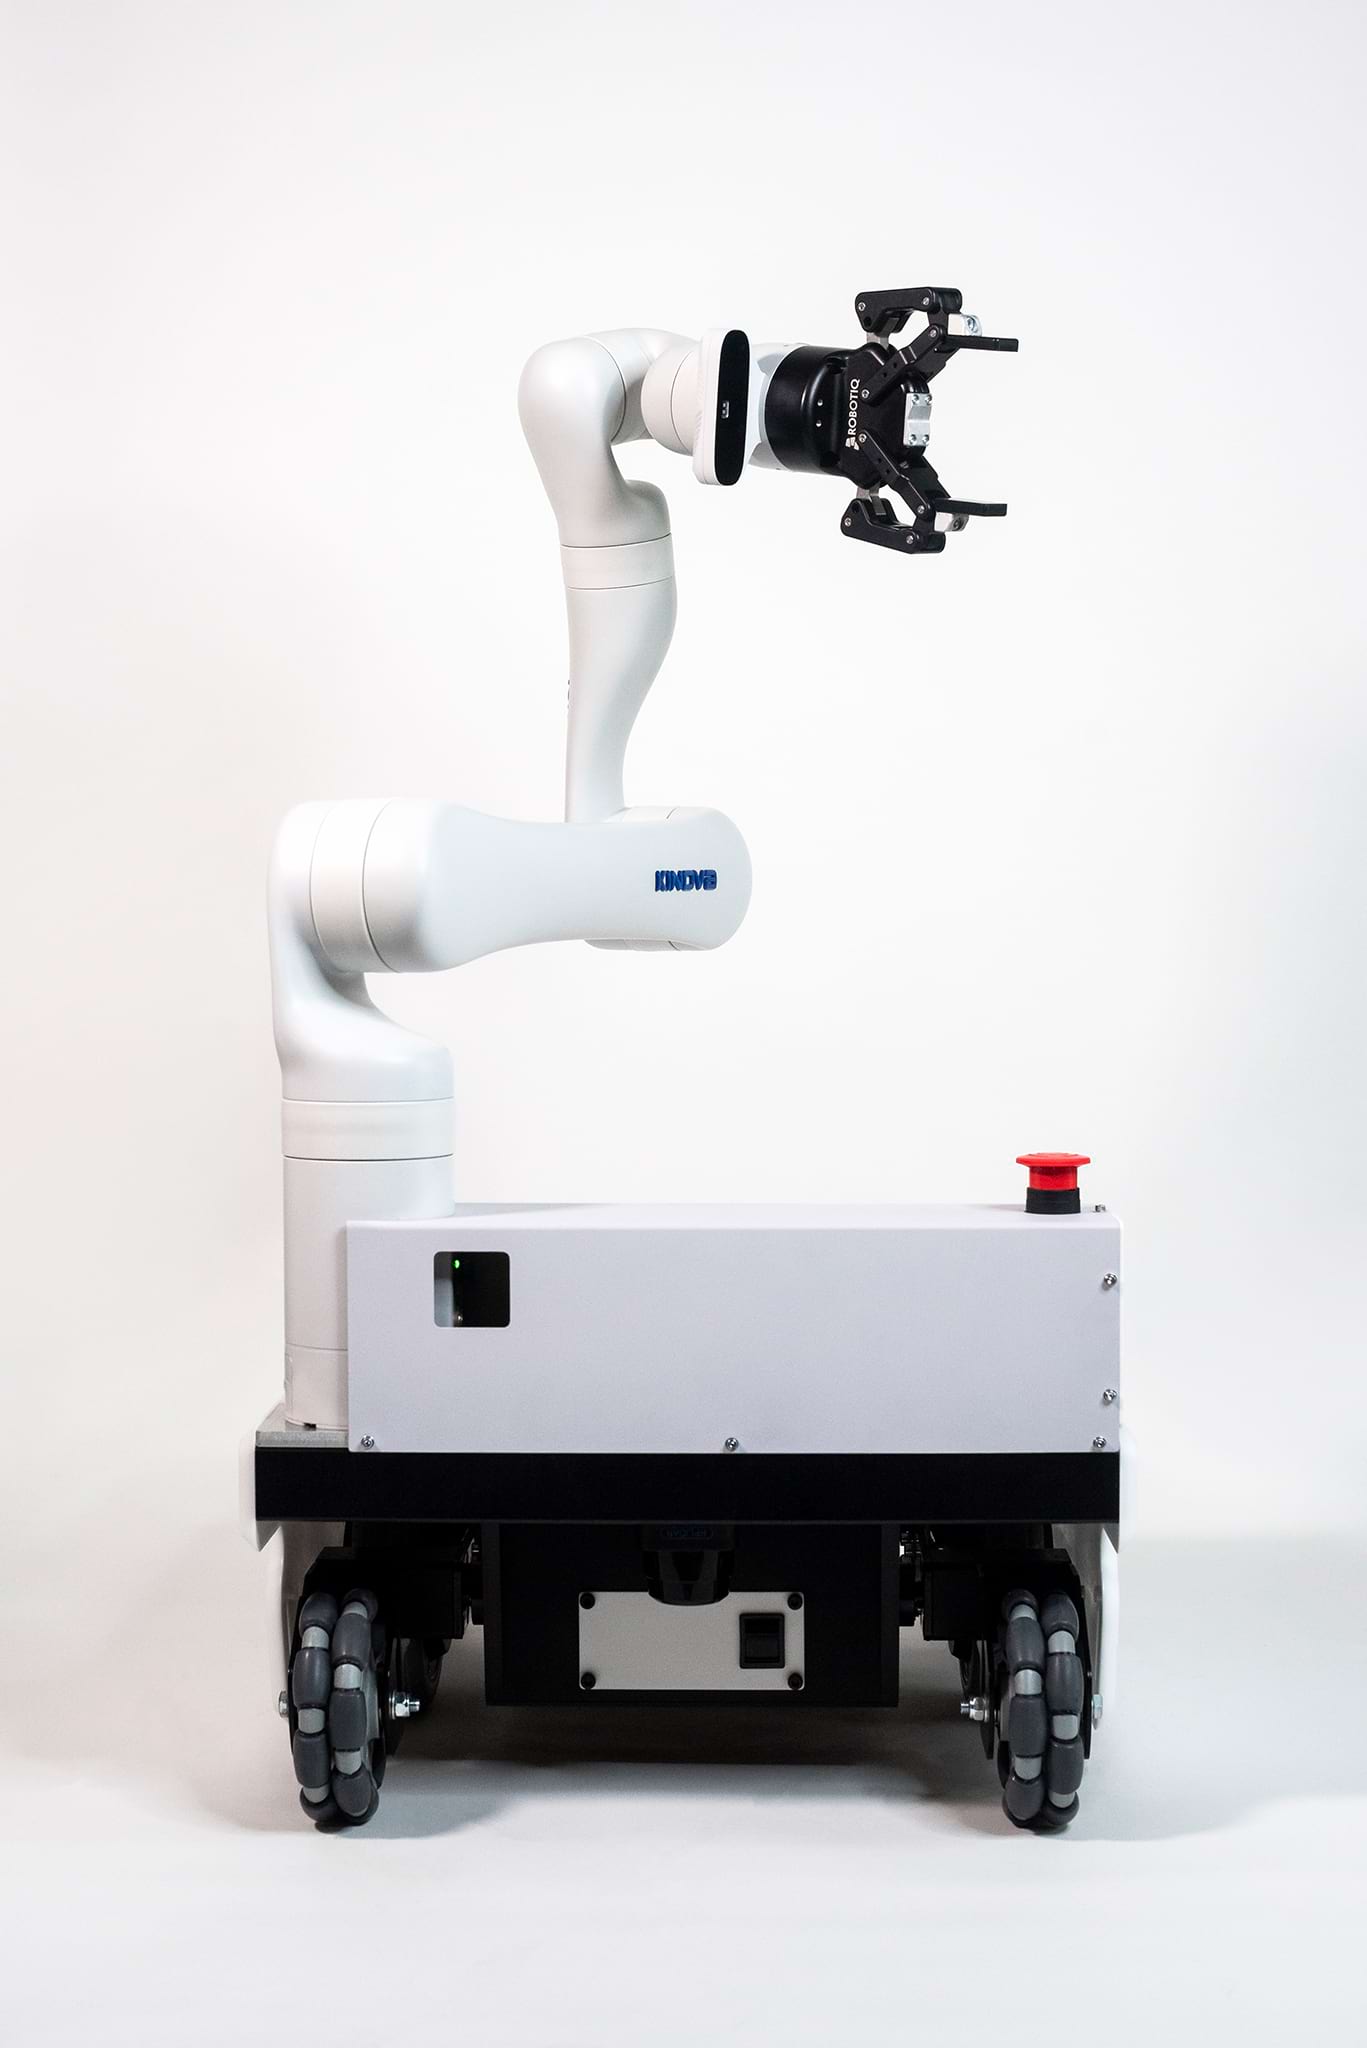 A white mobile robot on wheels with a white robotic arm with and a black gripper.